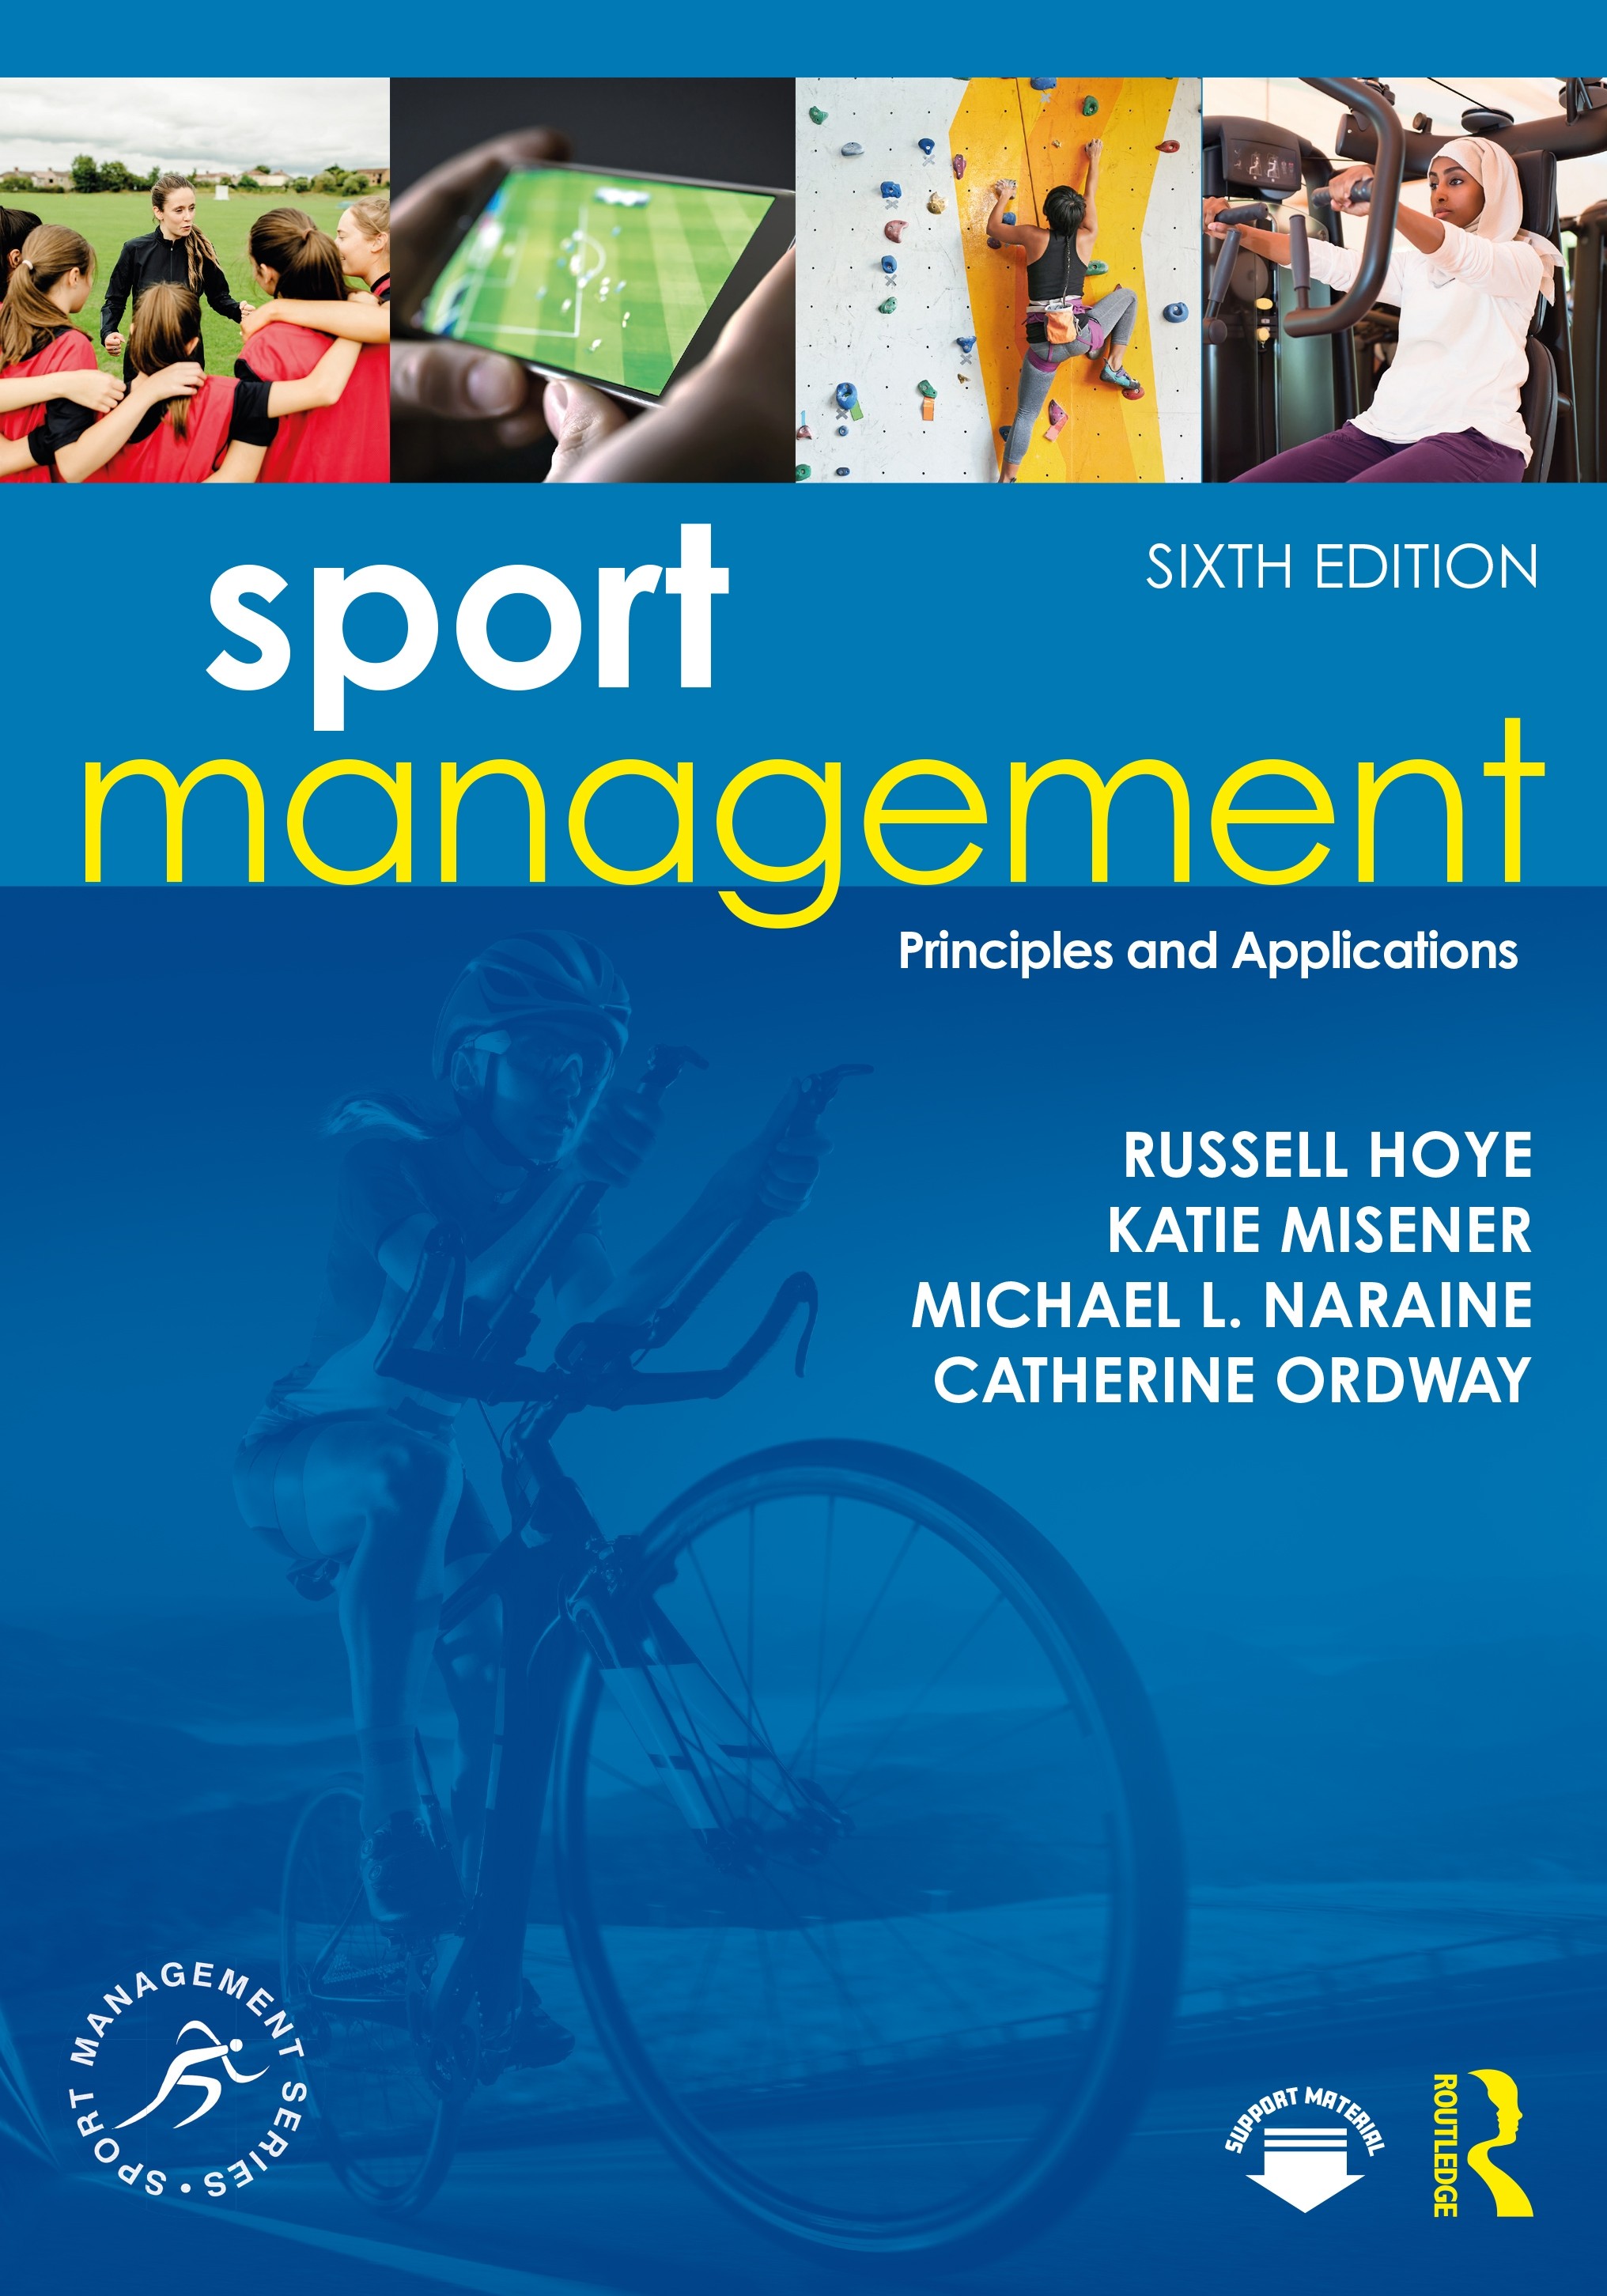 sports management topics for research